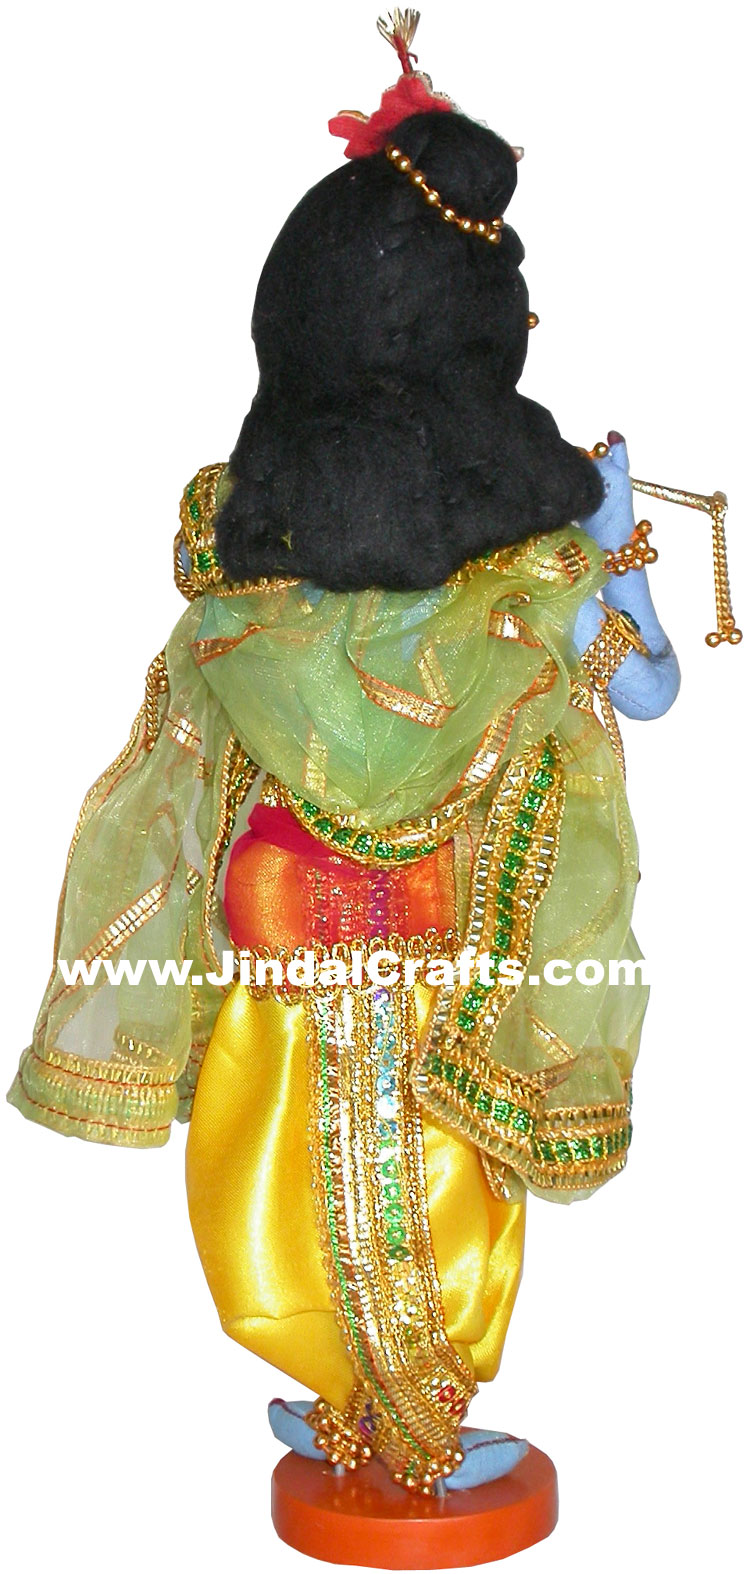 Lord Krishna Handmade Traditional Indian Collectible Costume Doll Home Decor Art